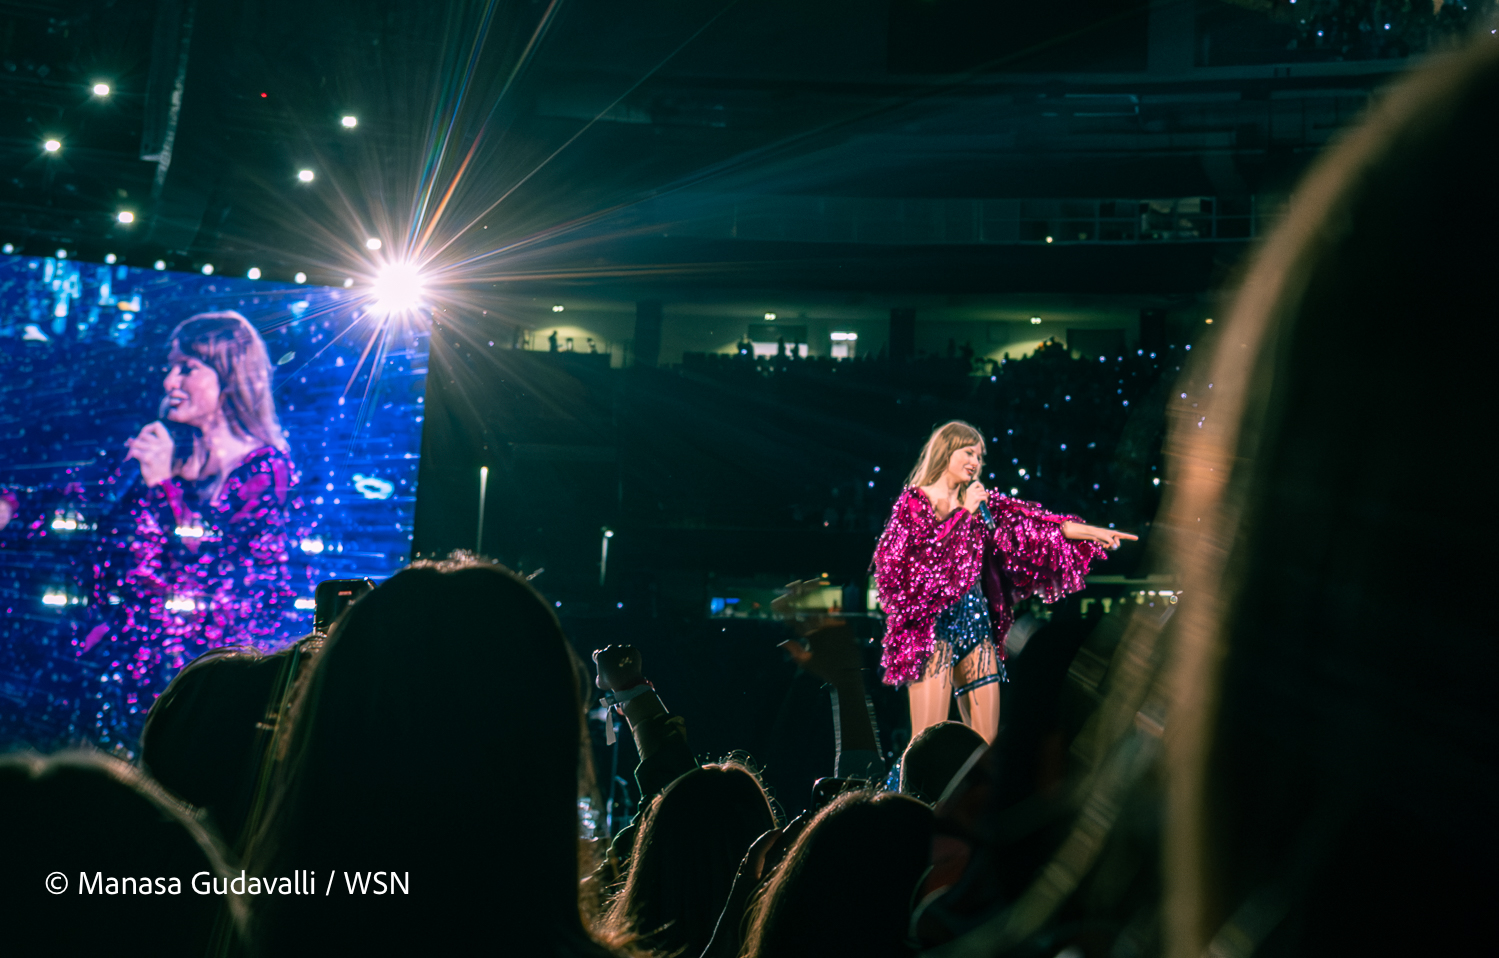 Taylor Swift points out into the crowd at Gillette Stadium with a microphone in hand, wearing a sparkly black leotard with a sparkly hot pink top that has long ruffled sleeves. In the background, fans hold up their phones in the mostly dark stadium, with fans facing the stage standing in the foreground. A screen playing live footage of Swift’s performance stands behind her along with a bright white light.